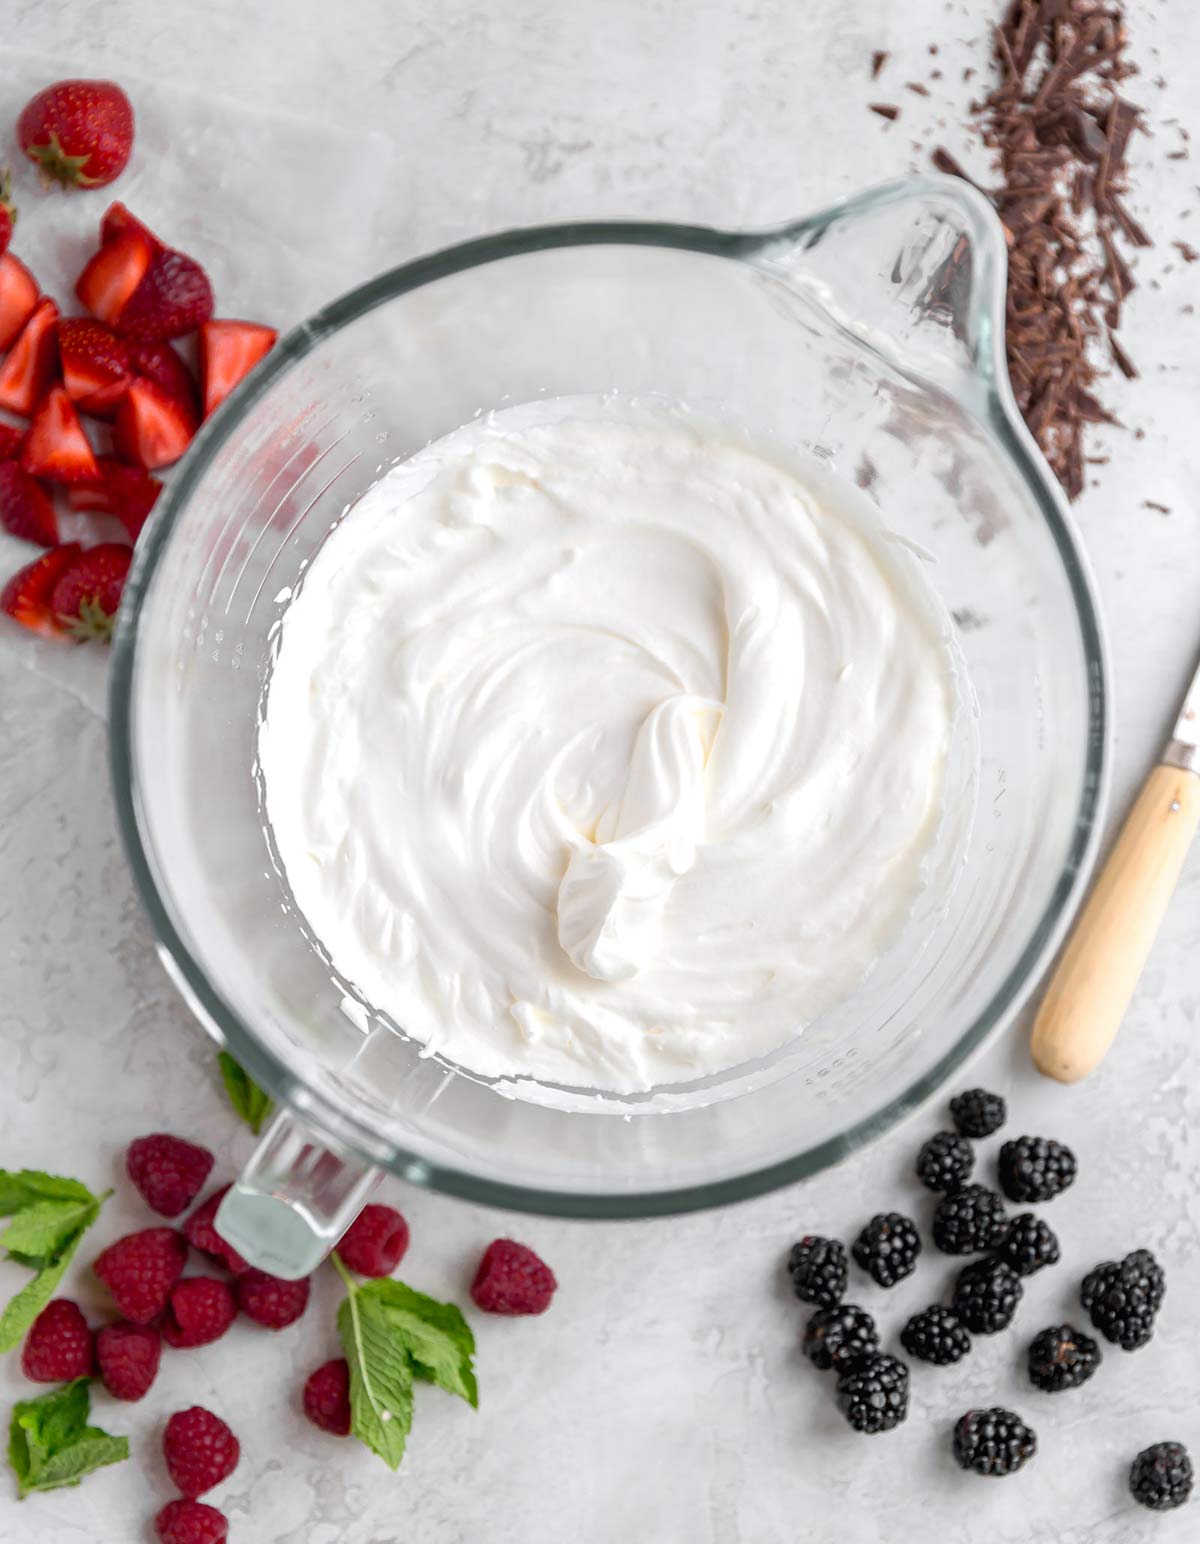 an overhead view of fresh whipped cream in a large glass mixing bowl with raspberries, blackberries, mint leaves, chopped strawberries, and shaved chocolate around it